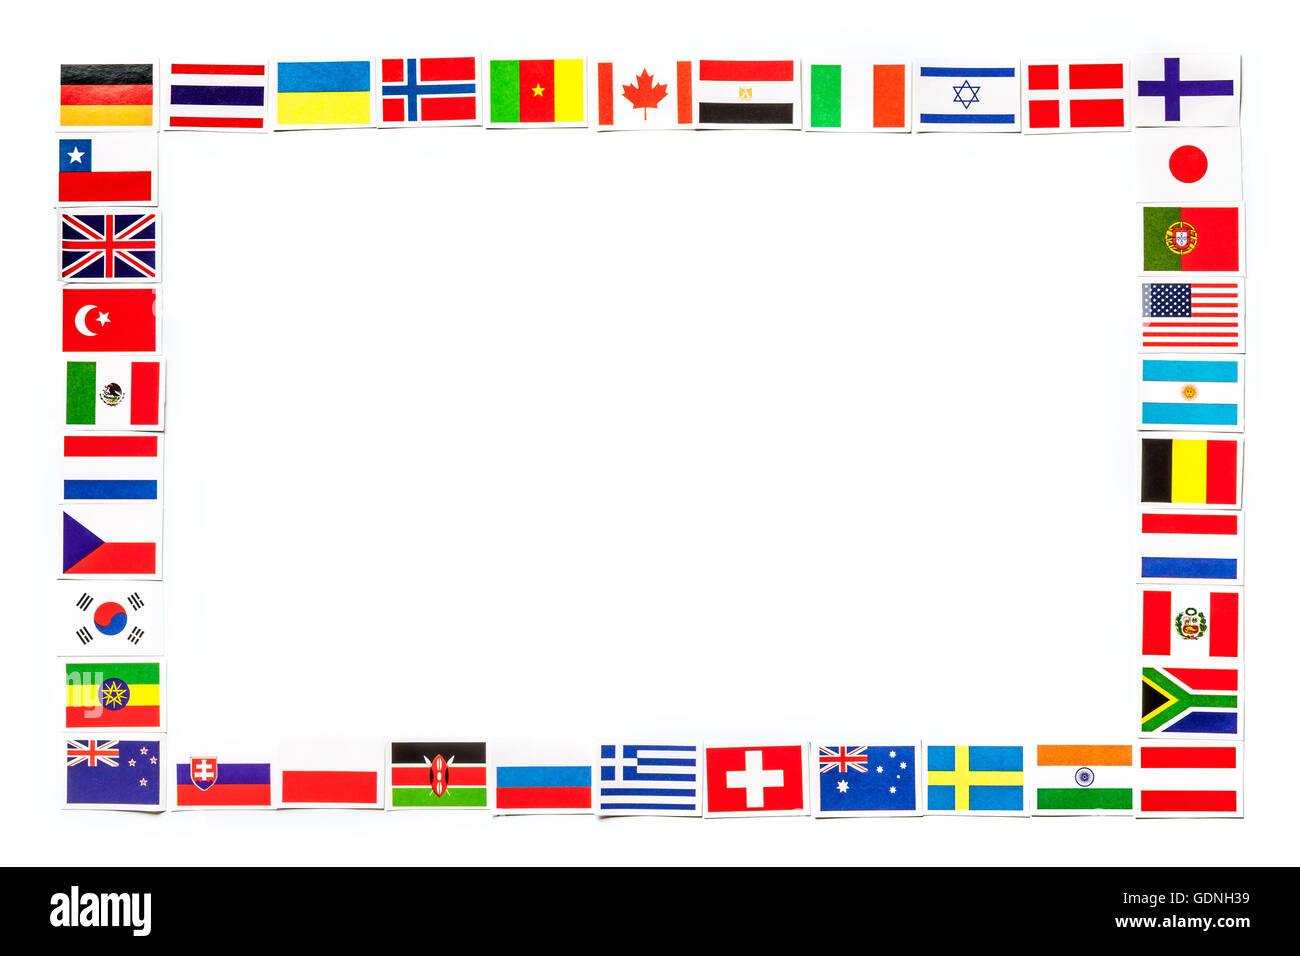 Frame Of National Flags The Different Countries Of The World Isolated